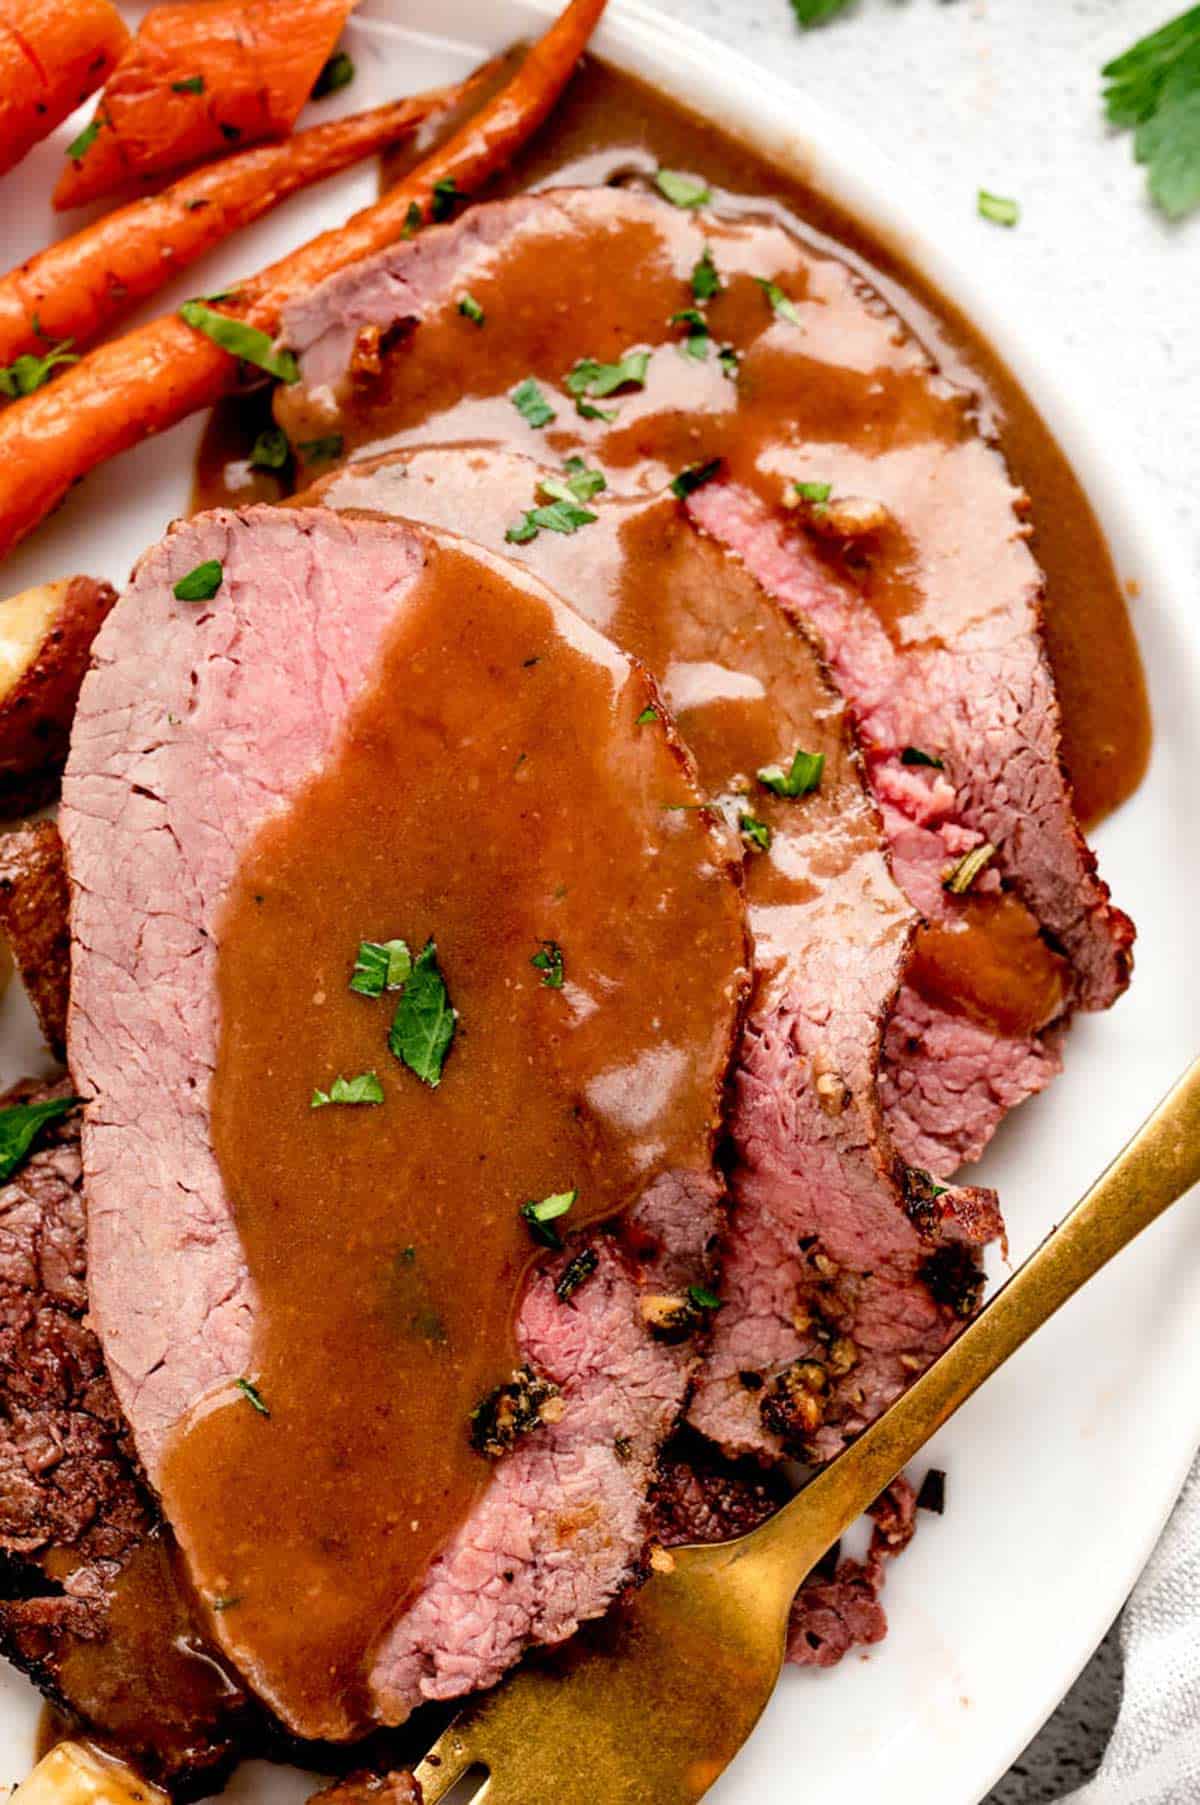 A serving of Christmas beef roast, with gravy and carrots.